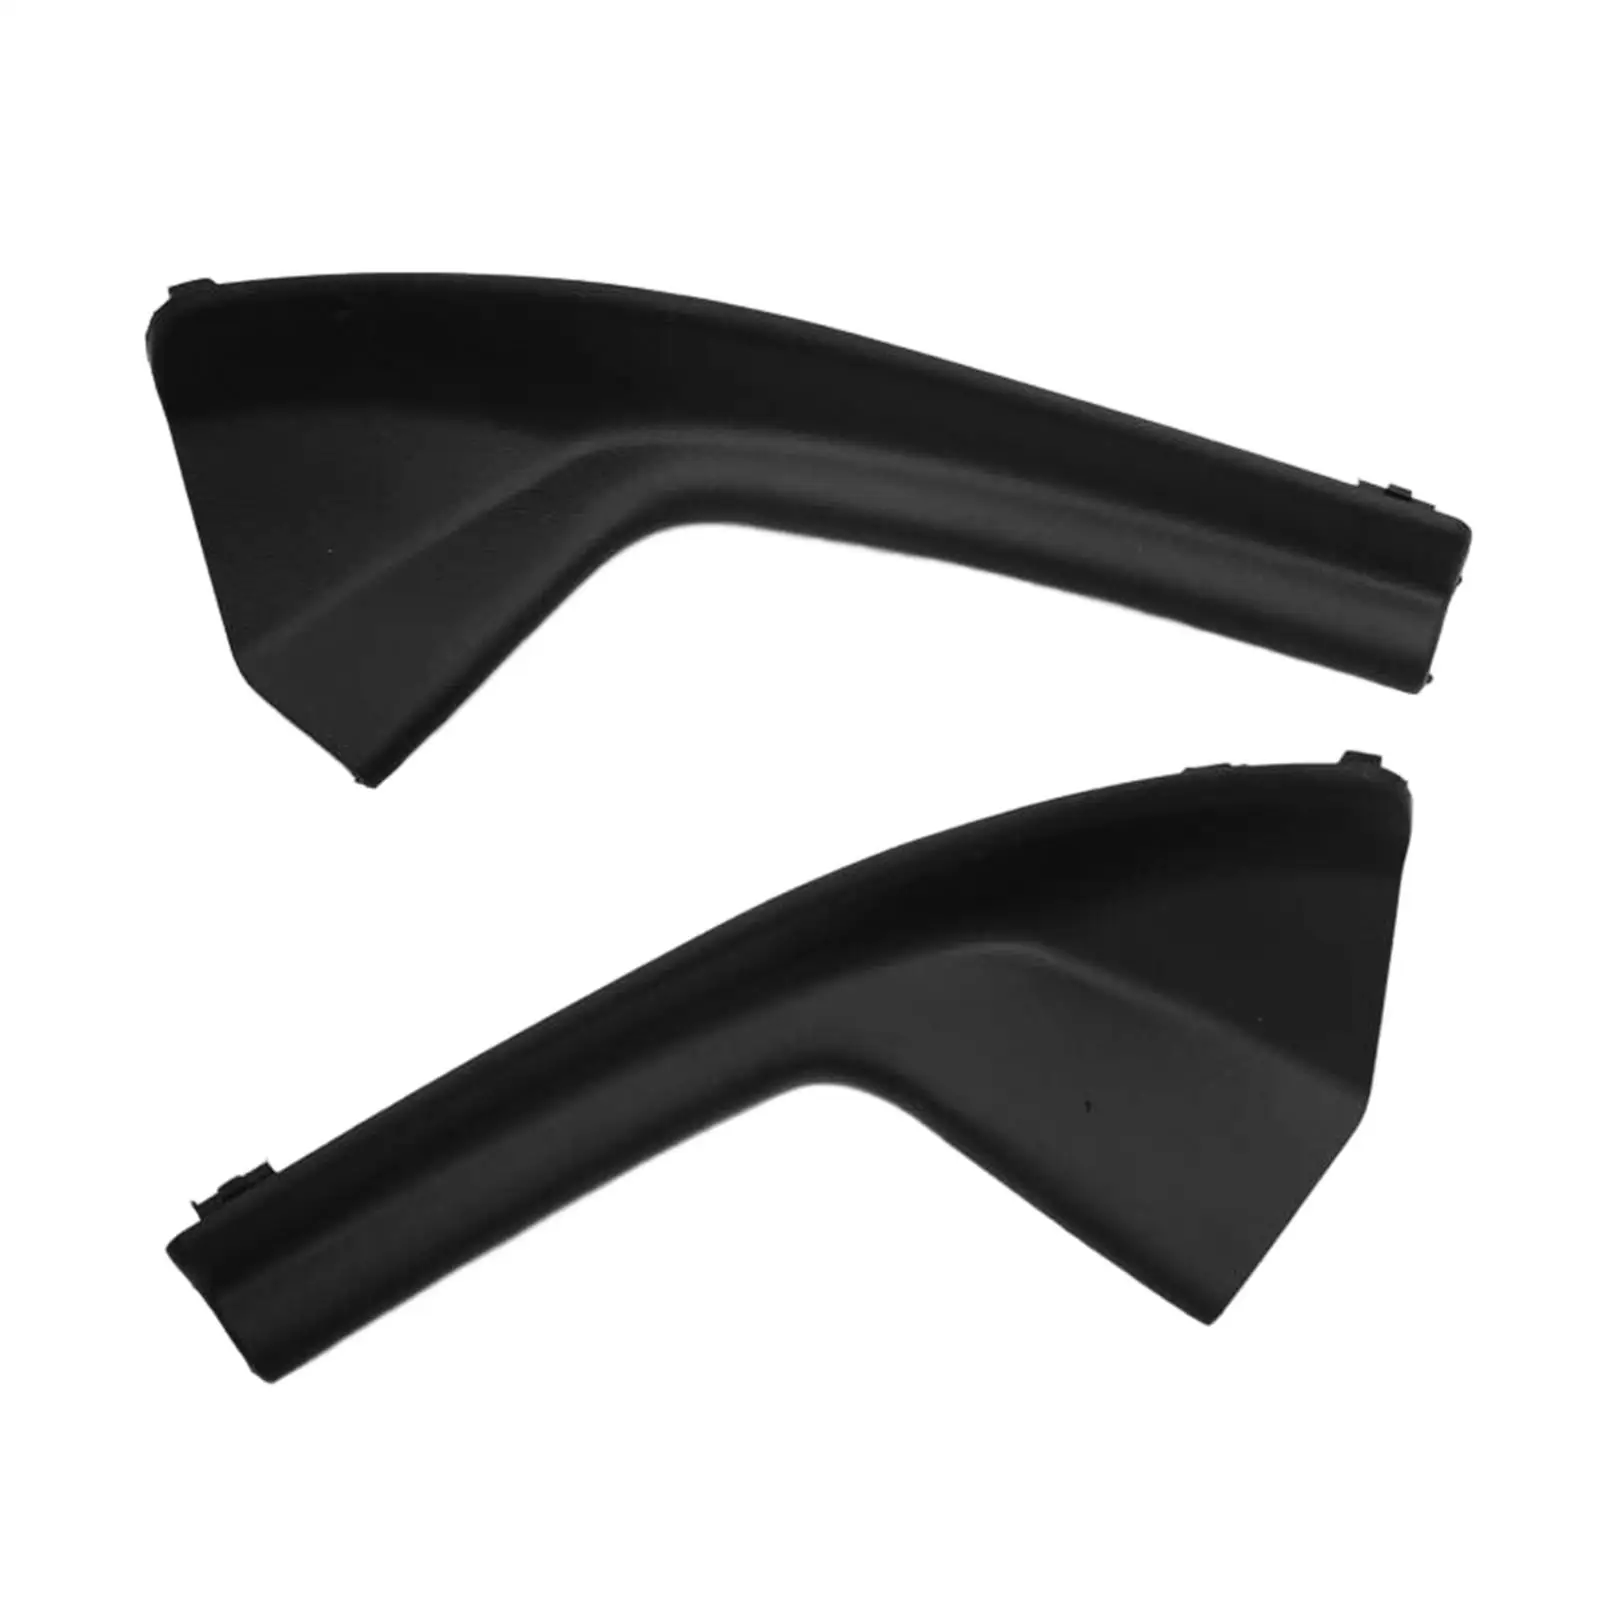 2 Pieces Windshield Wiper Cowl Cover Trim 66895-ed50A 66894-ed500 Durable Water Deflector Cowl Plate for Nissan Versa Sedan